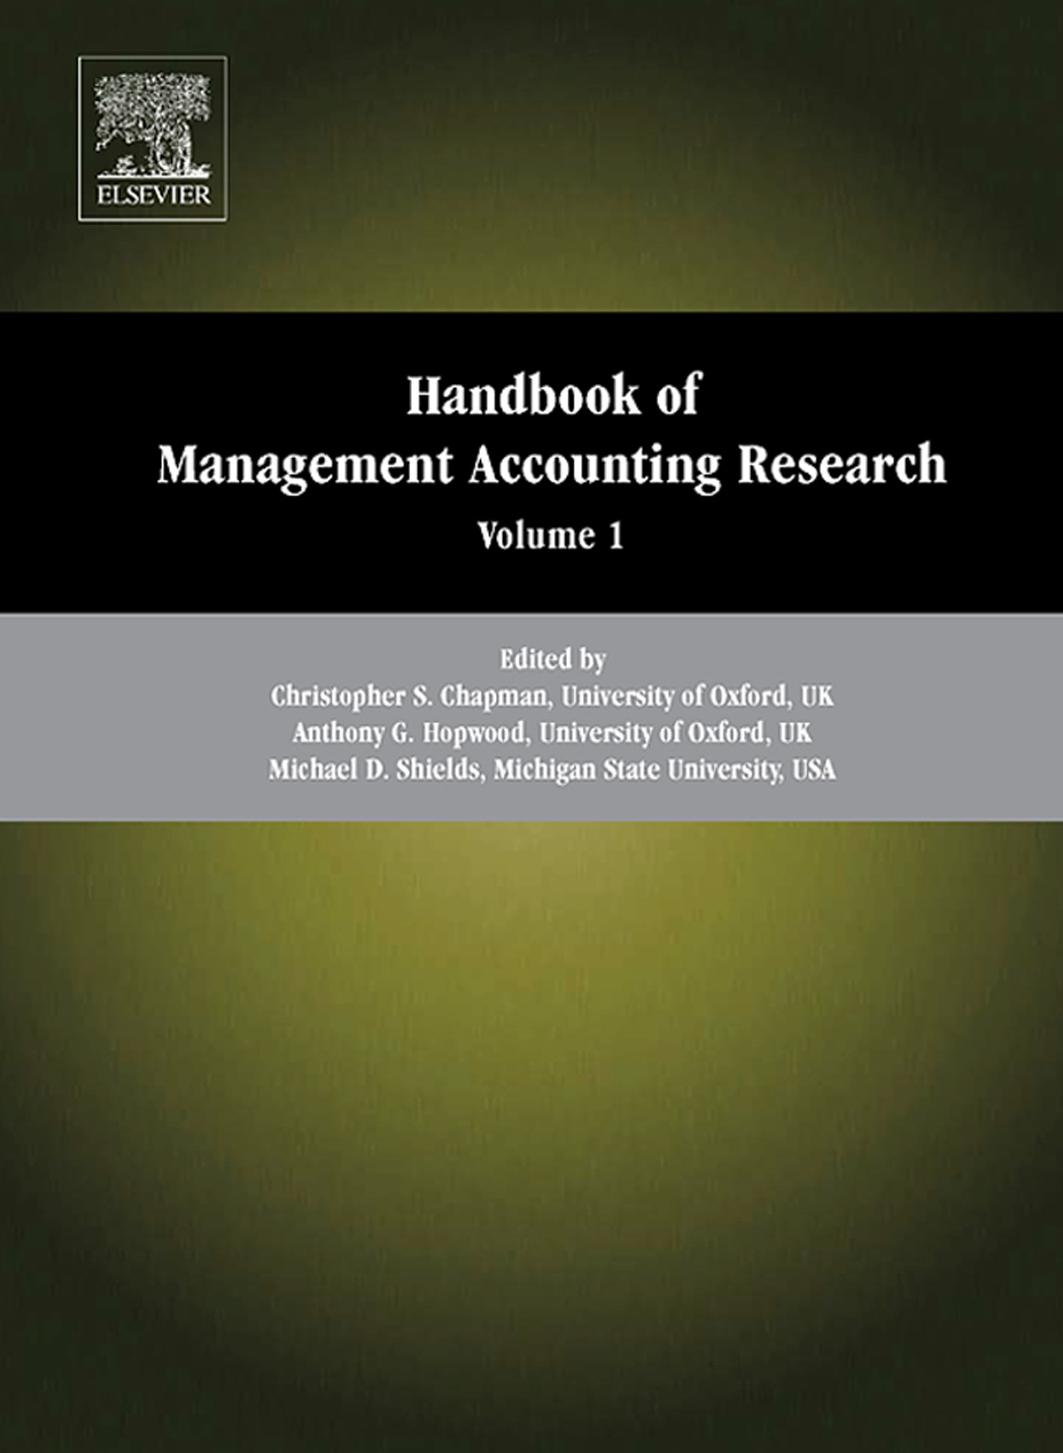 (eBook PDF)Handbook of Management Accounting Research, Volume 1 by Christopher S. Chapman